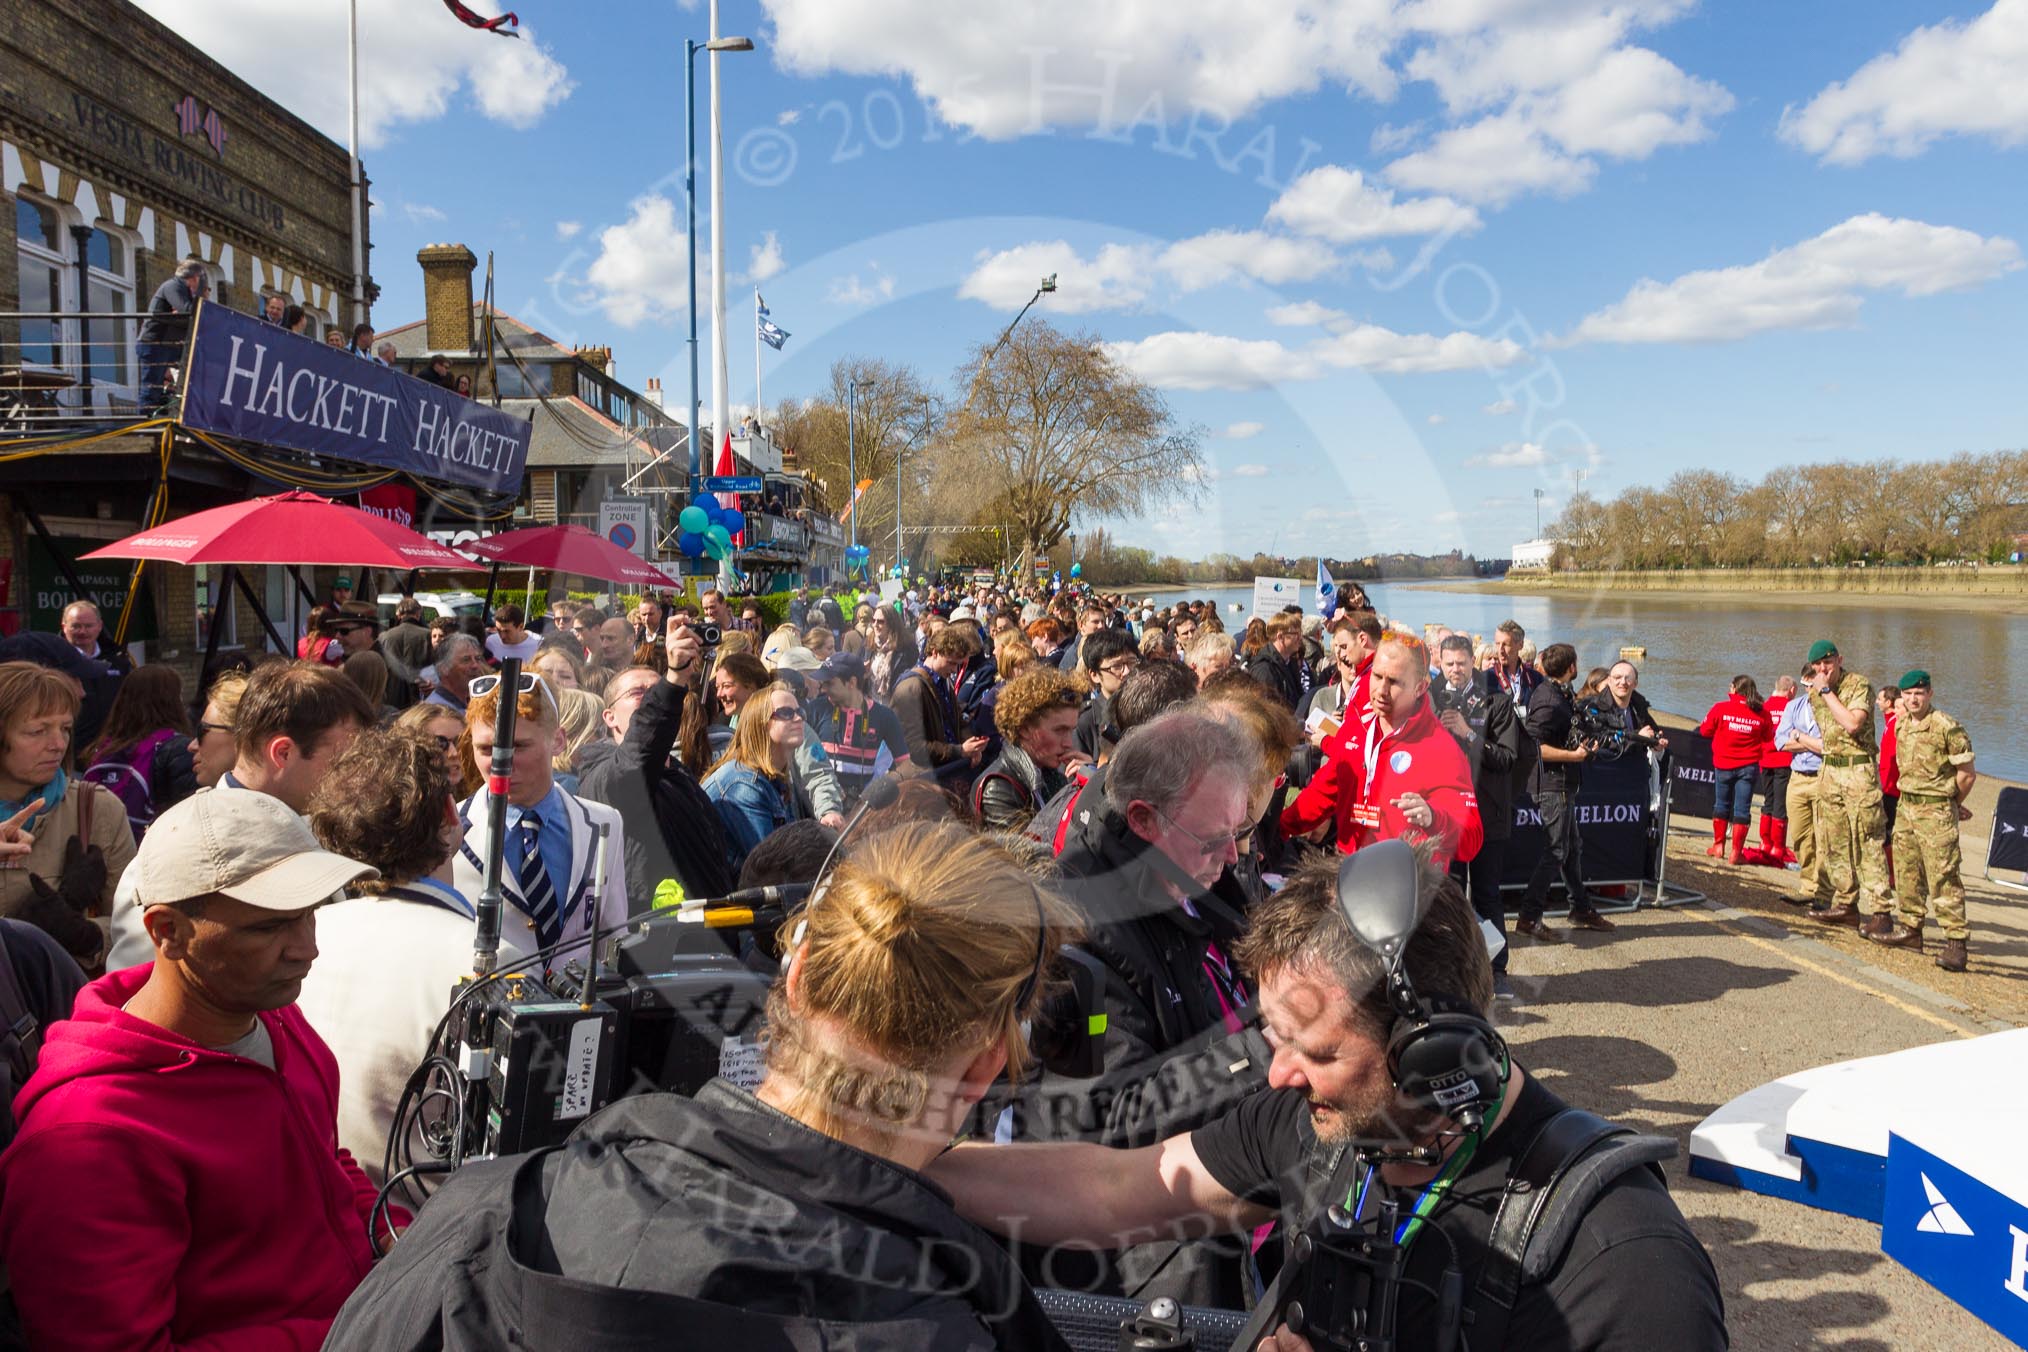 The Boat Race season 2015 - Newton Women's Boat Race.
River Thames between Putney and Mortlake,
London,

United Kingdom,
on 11 April 2015 at 14:50, image #32